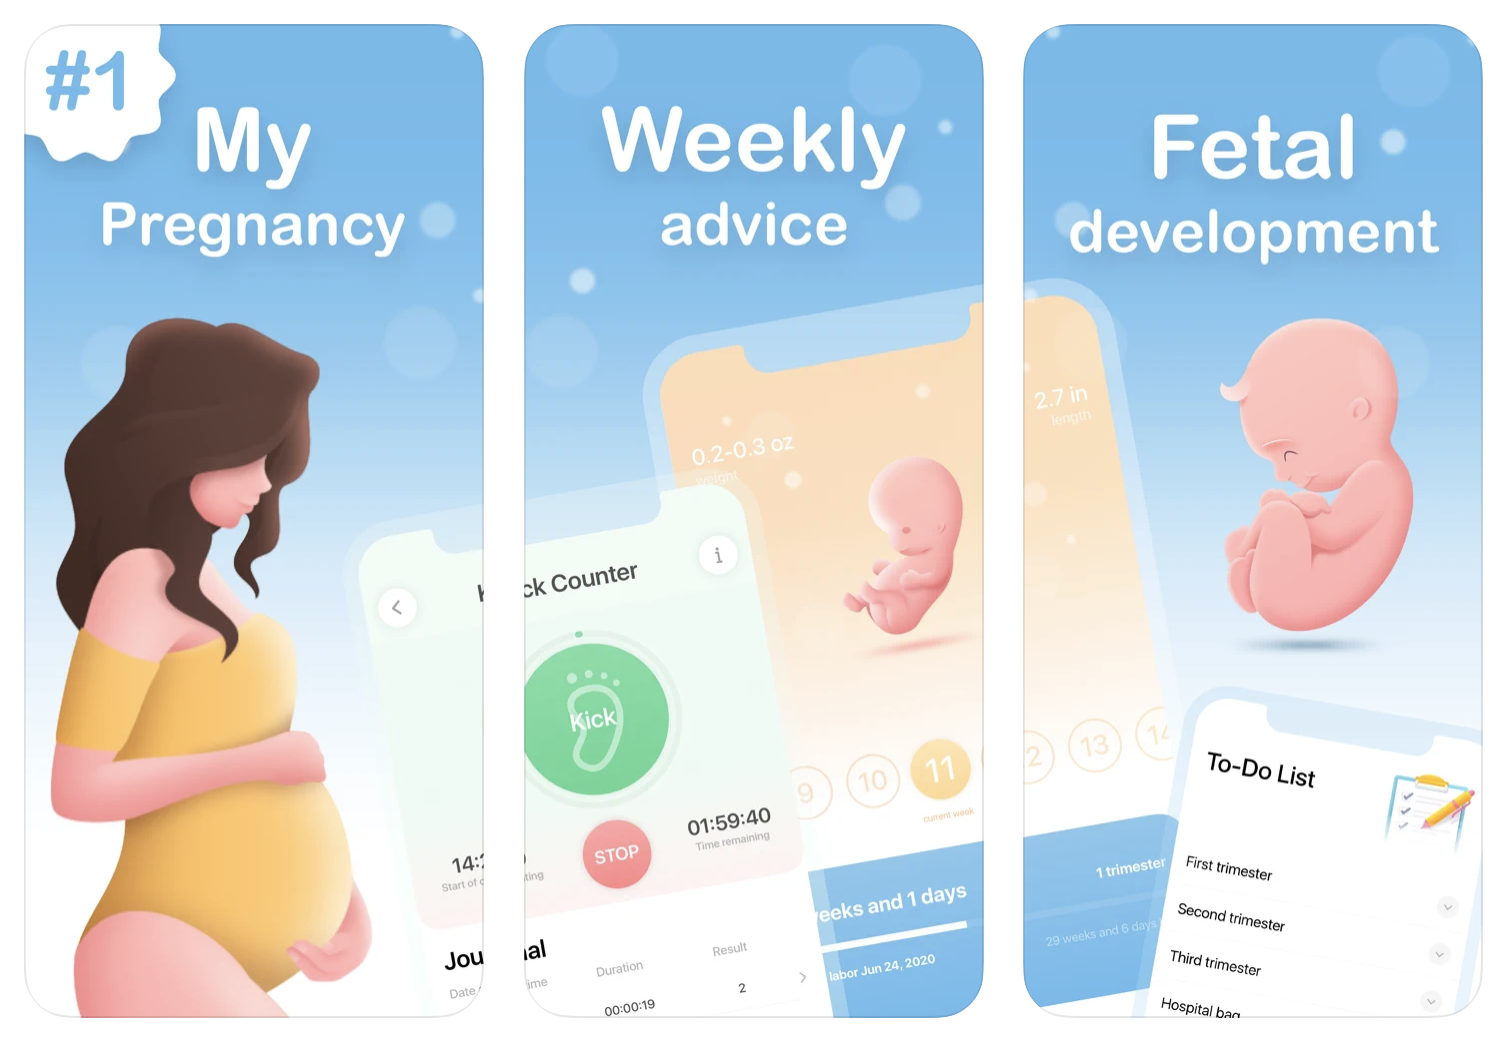 Period tracking app Flo rolls out 'Anonymous Mode' on iOS, Android